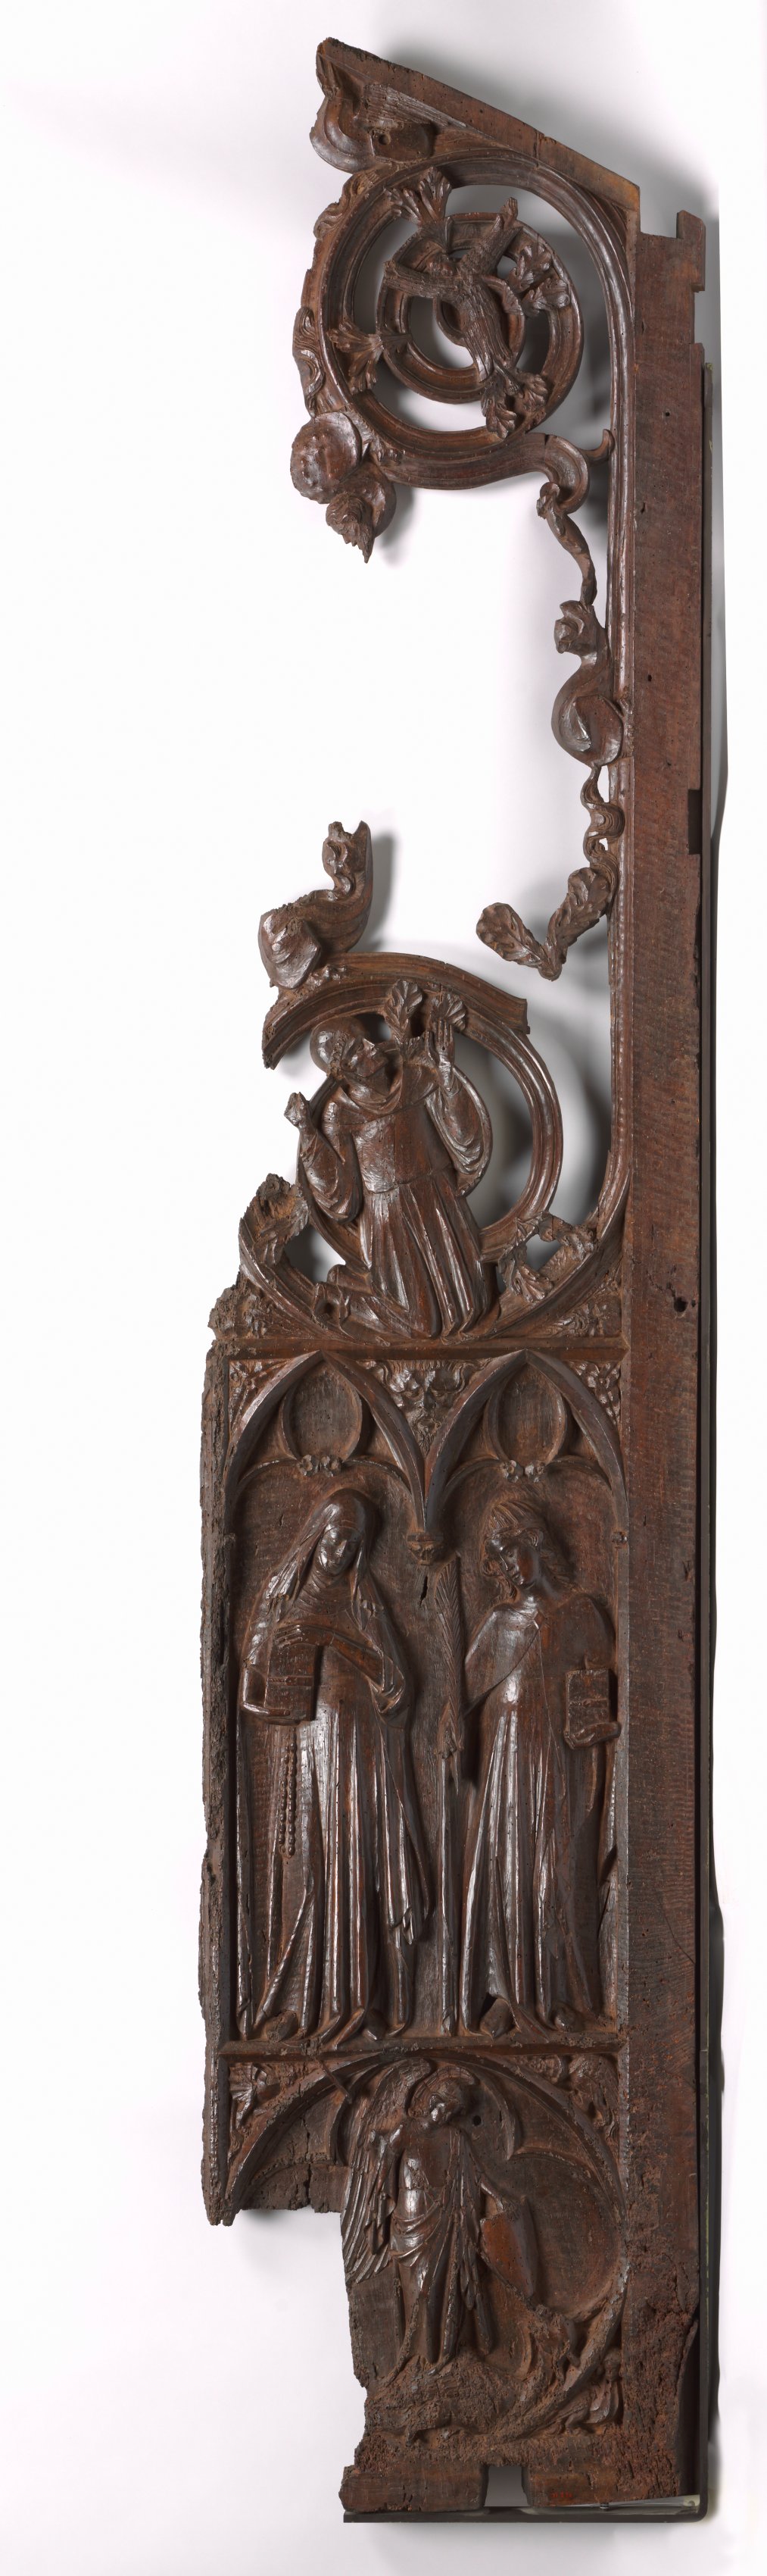 Panel from a Choir Stall